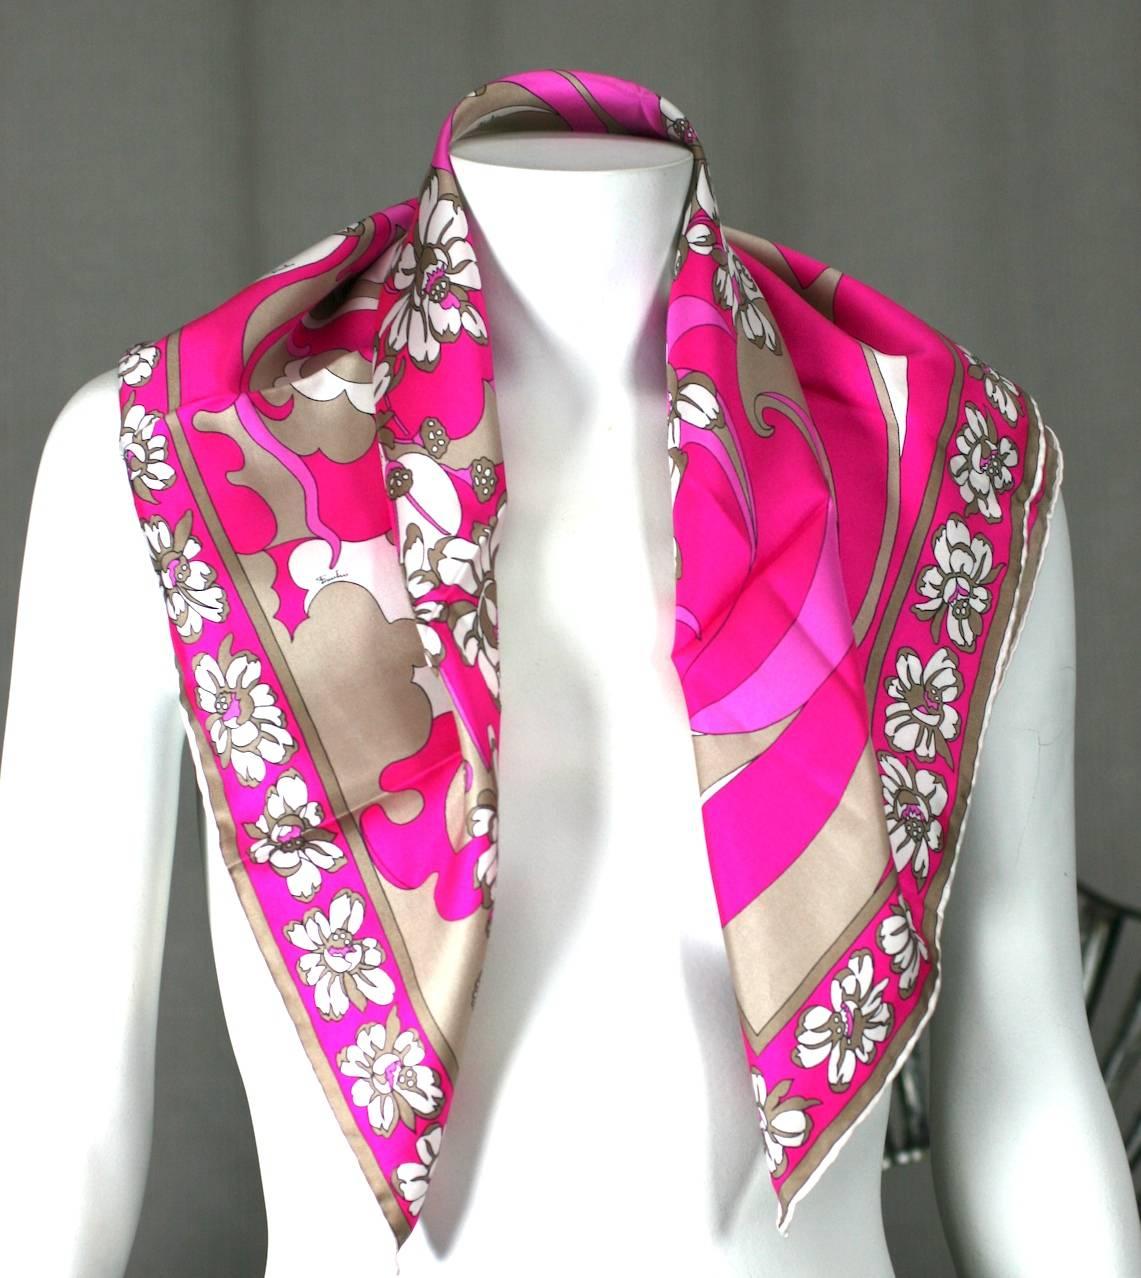 Emilio Pucci hot pink floral print scarf in silk twill. 2000's Italy. Excellent condition. 24" x 24". 